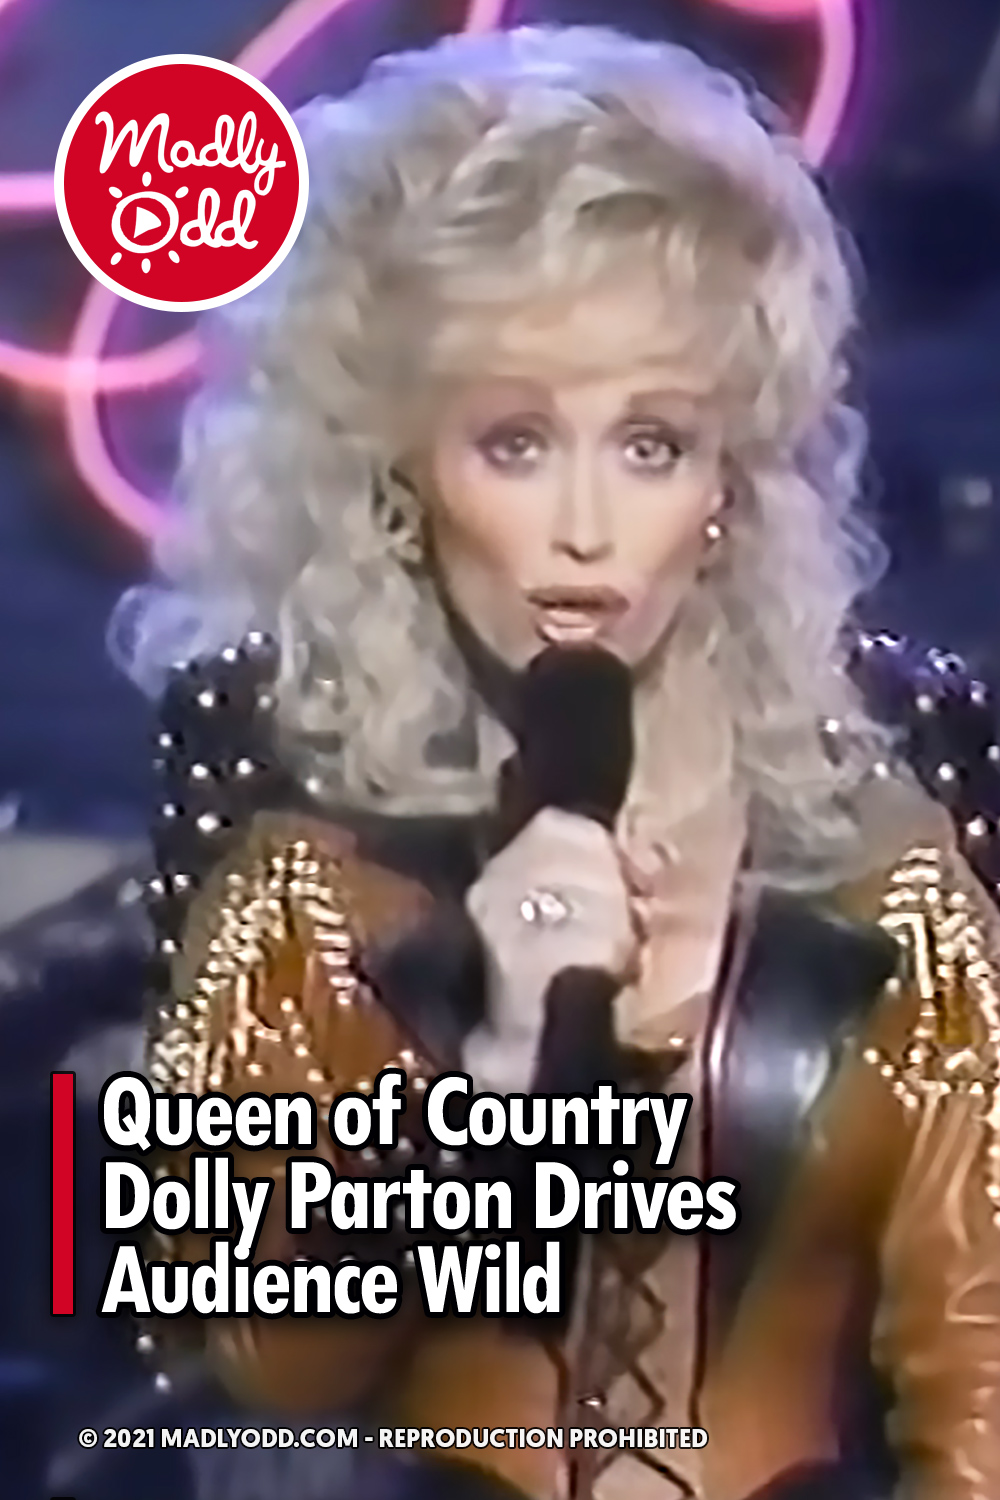 Queen of Country Dolly Parton Drives Audience Wild